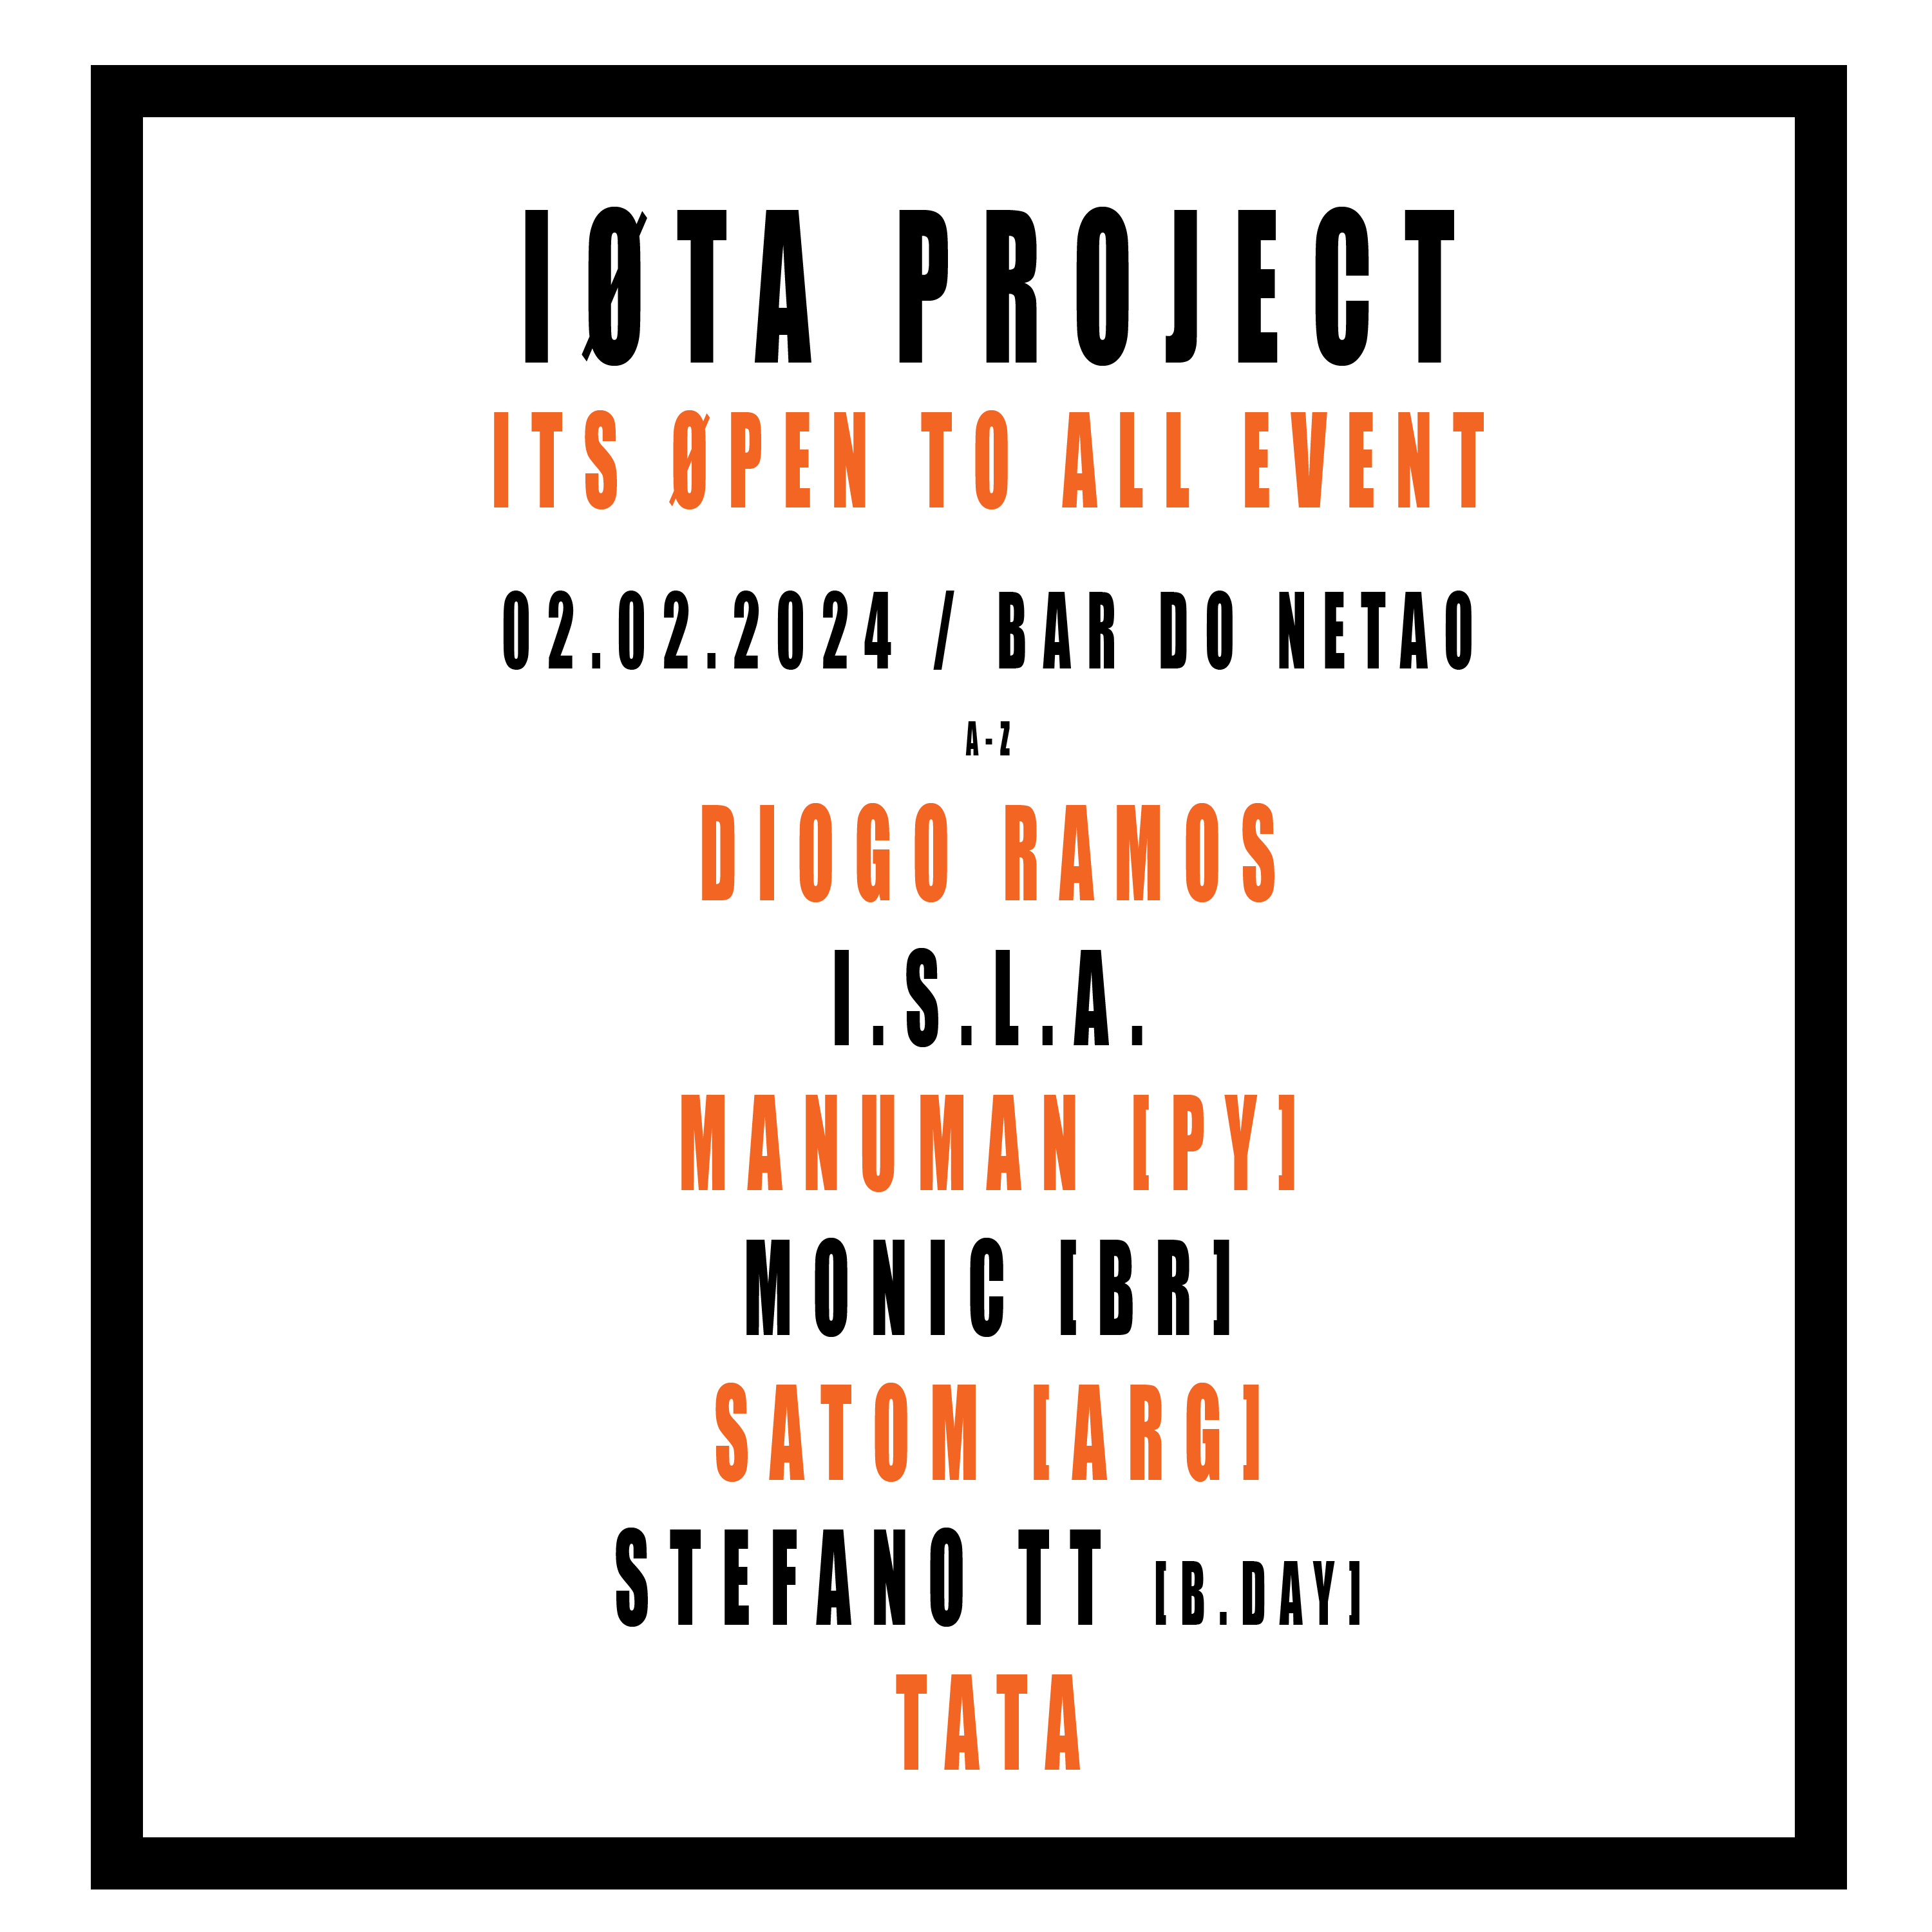 IØTA PROJECT LAUNCH PARTY  - フライヤー表